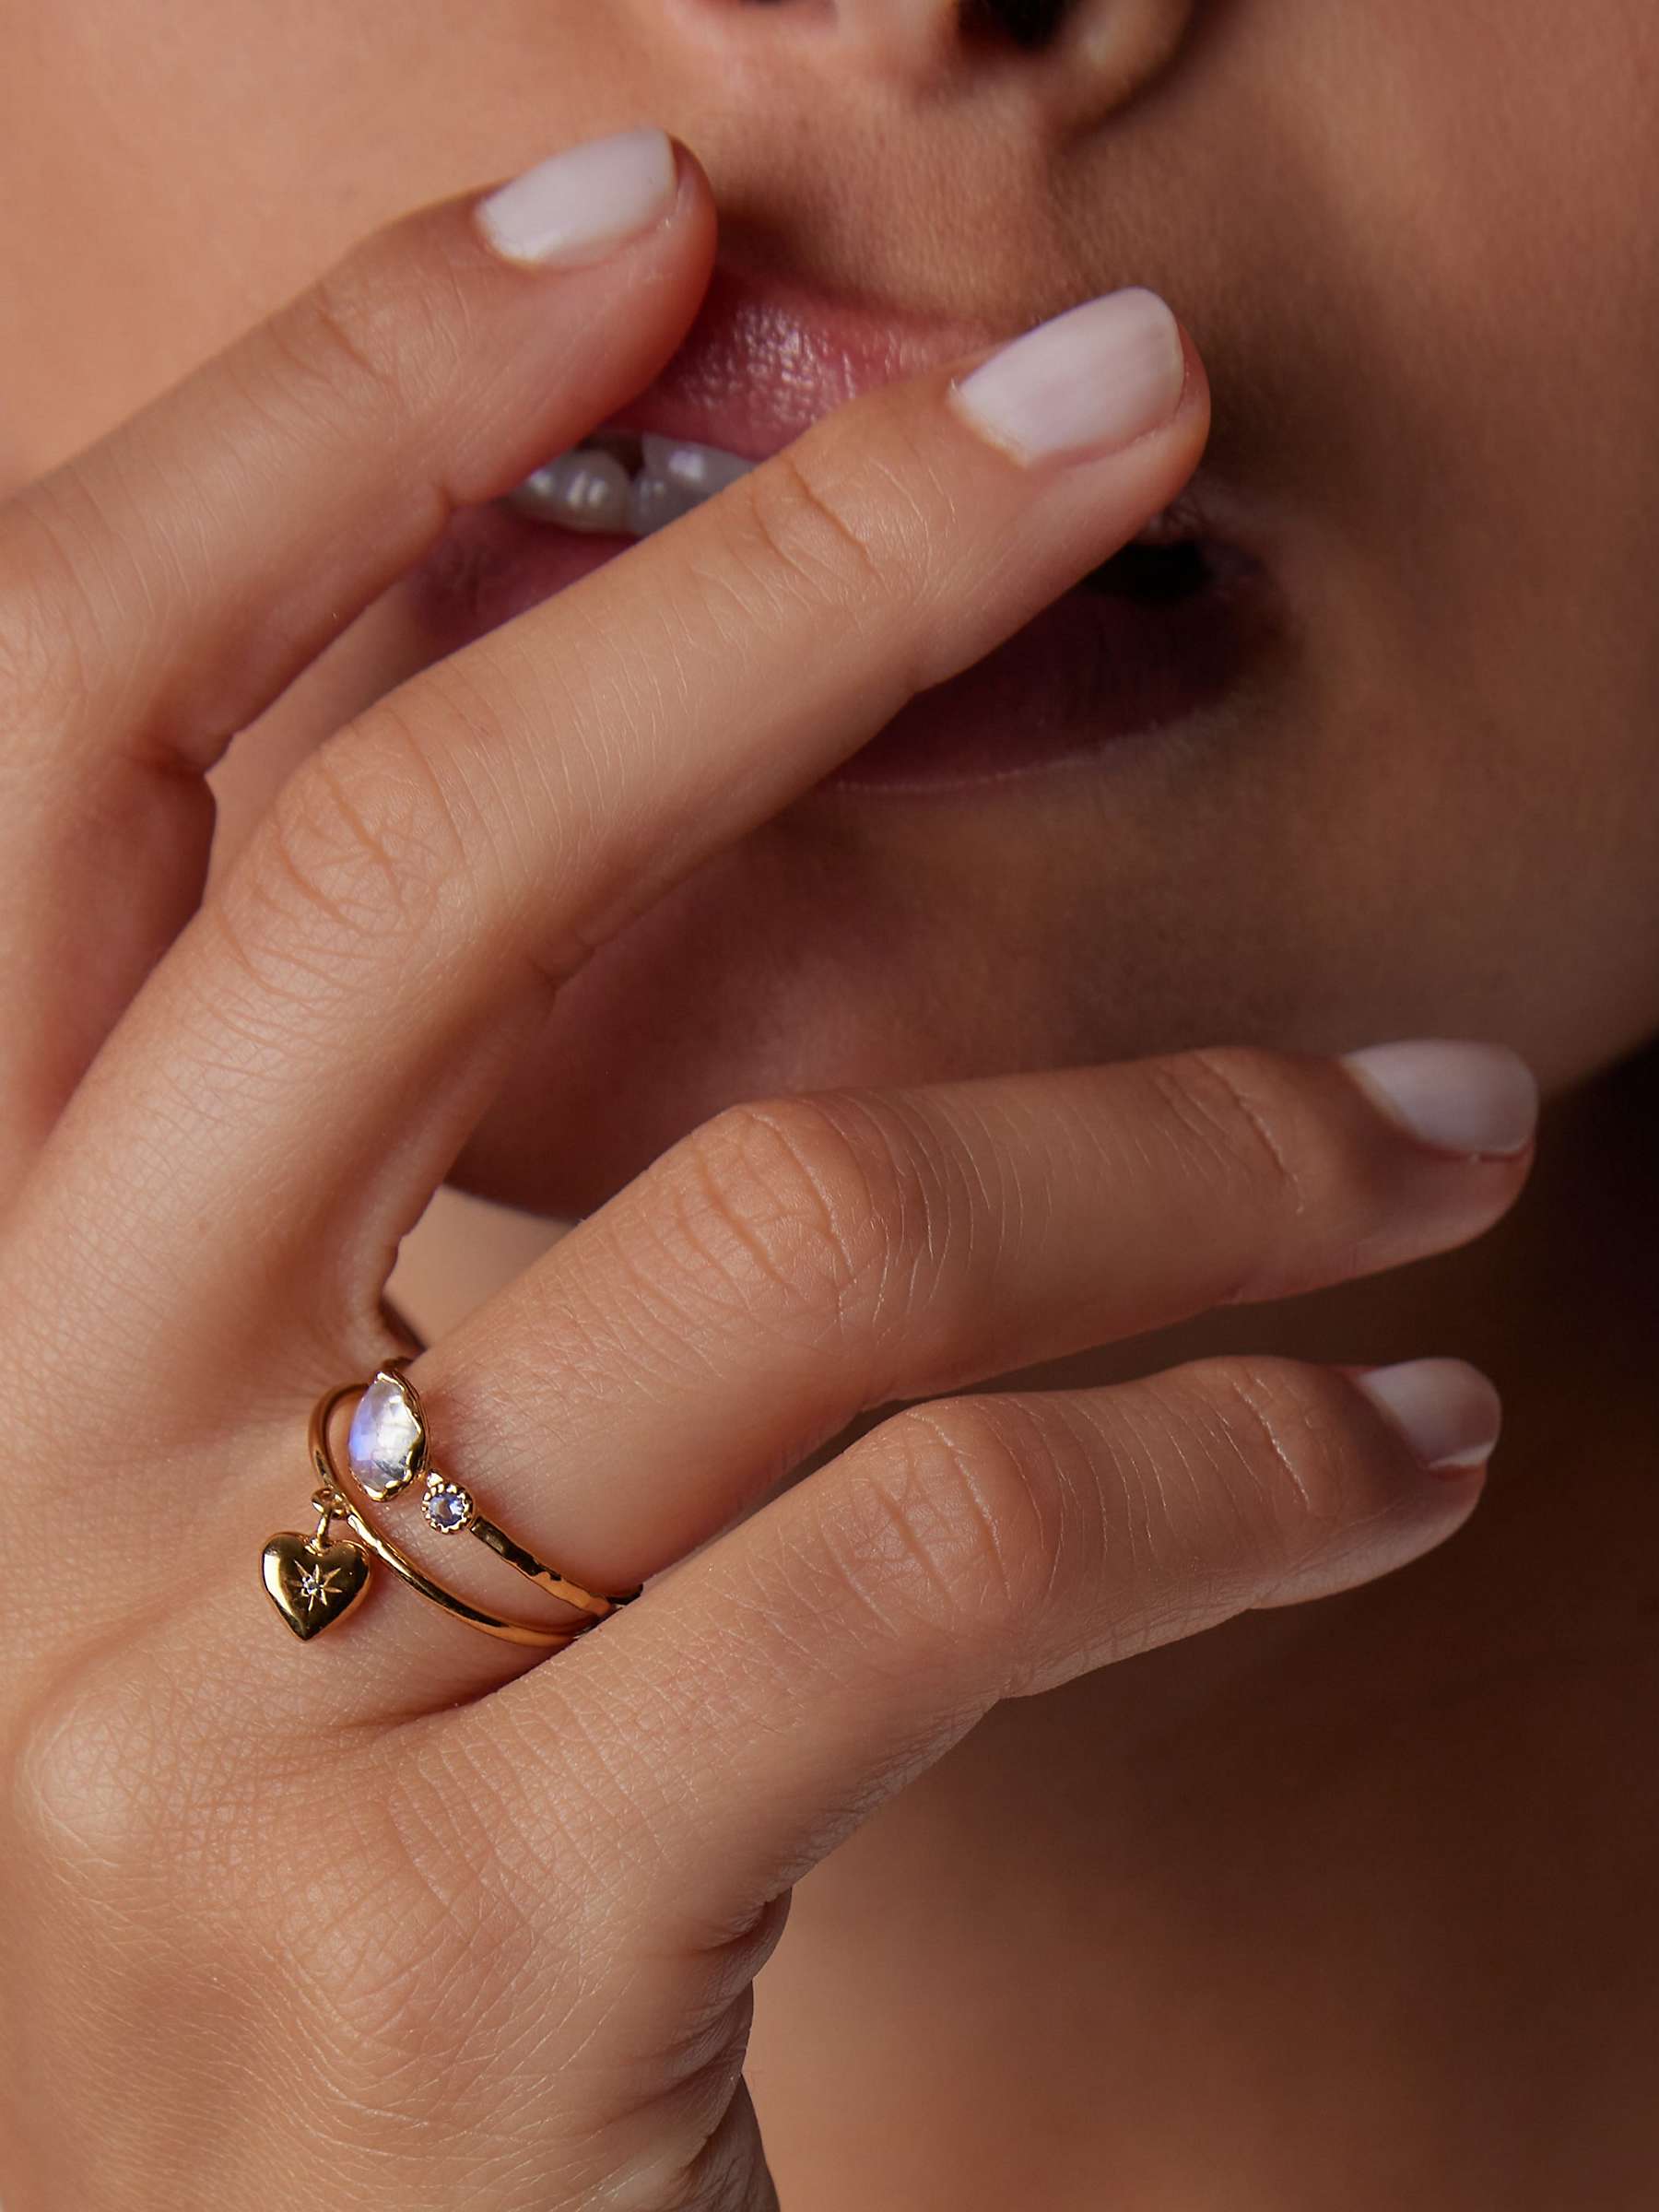 Buy Orelia Luxe Molten Moonstone Cocktail Ring, Gold Online at johnlewis.com